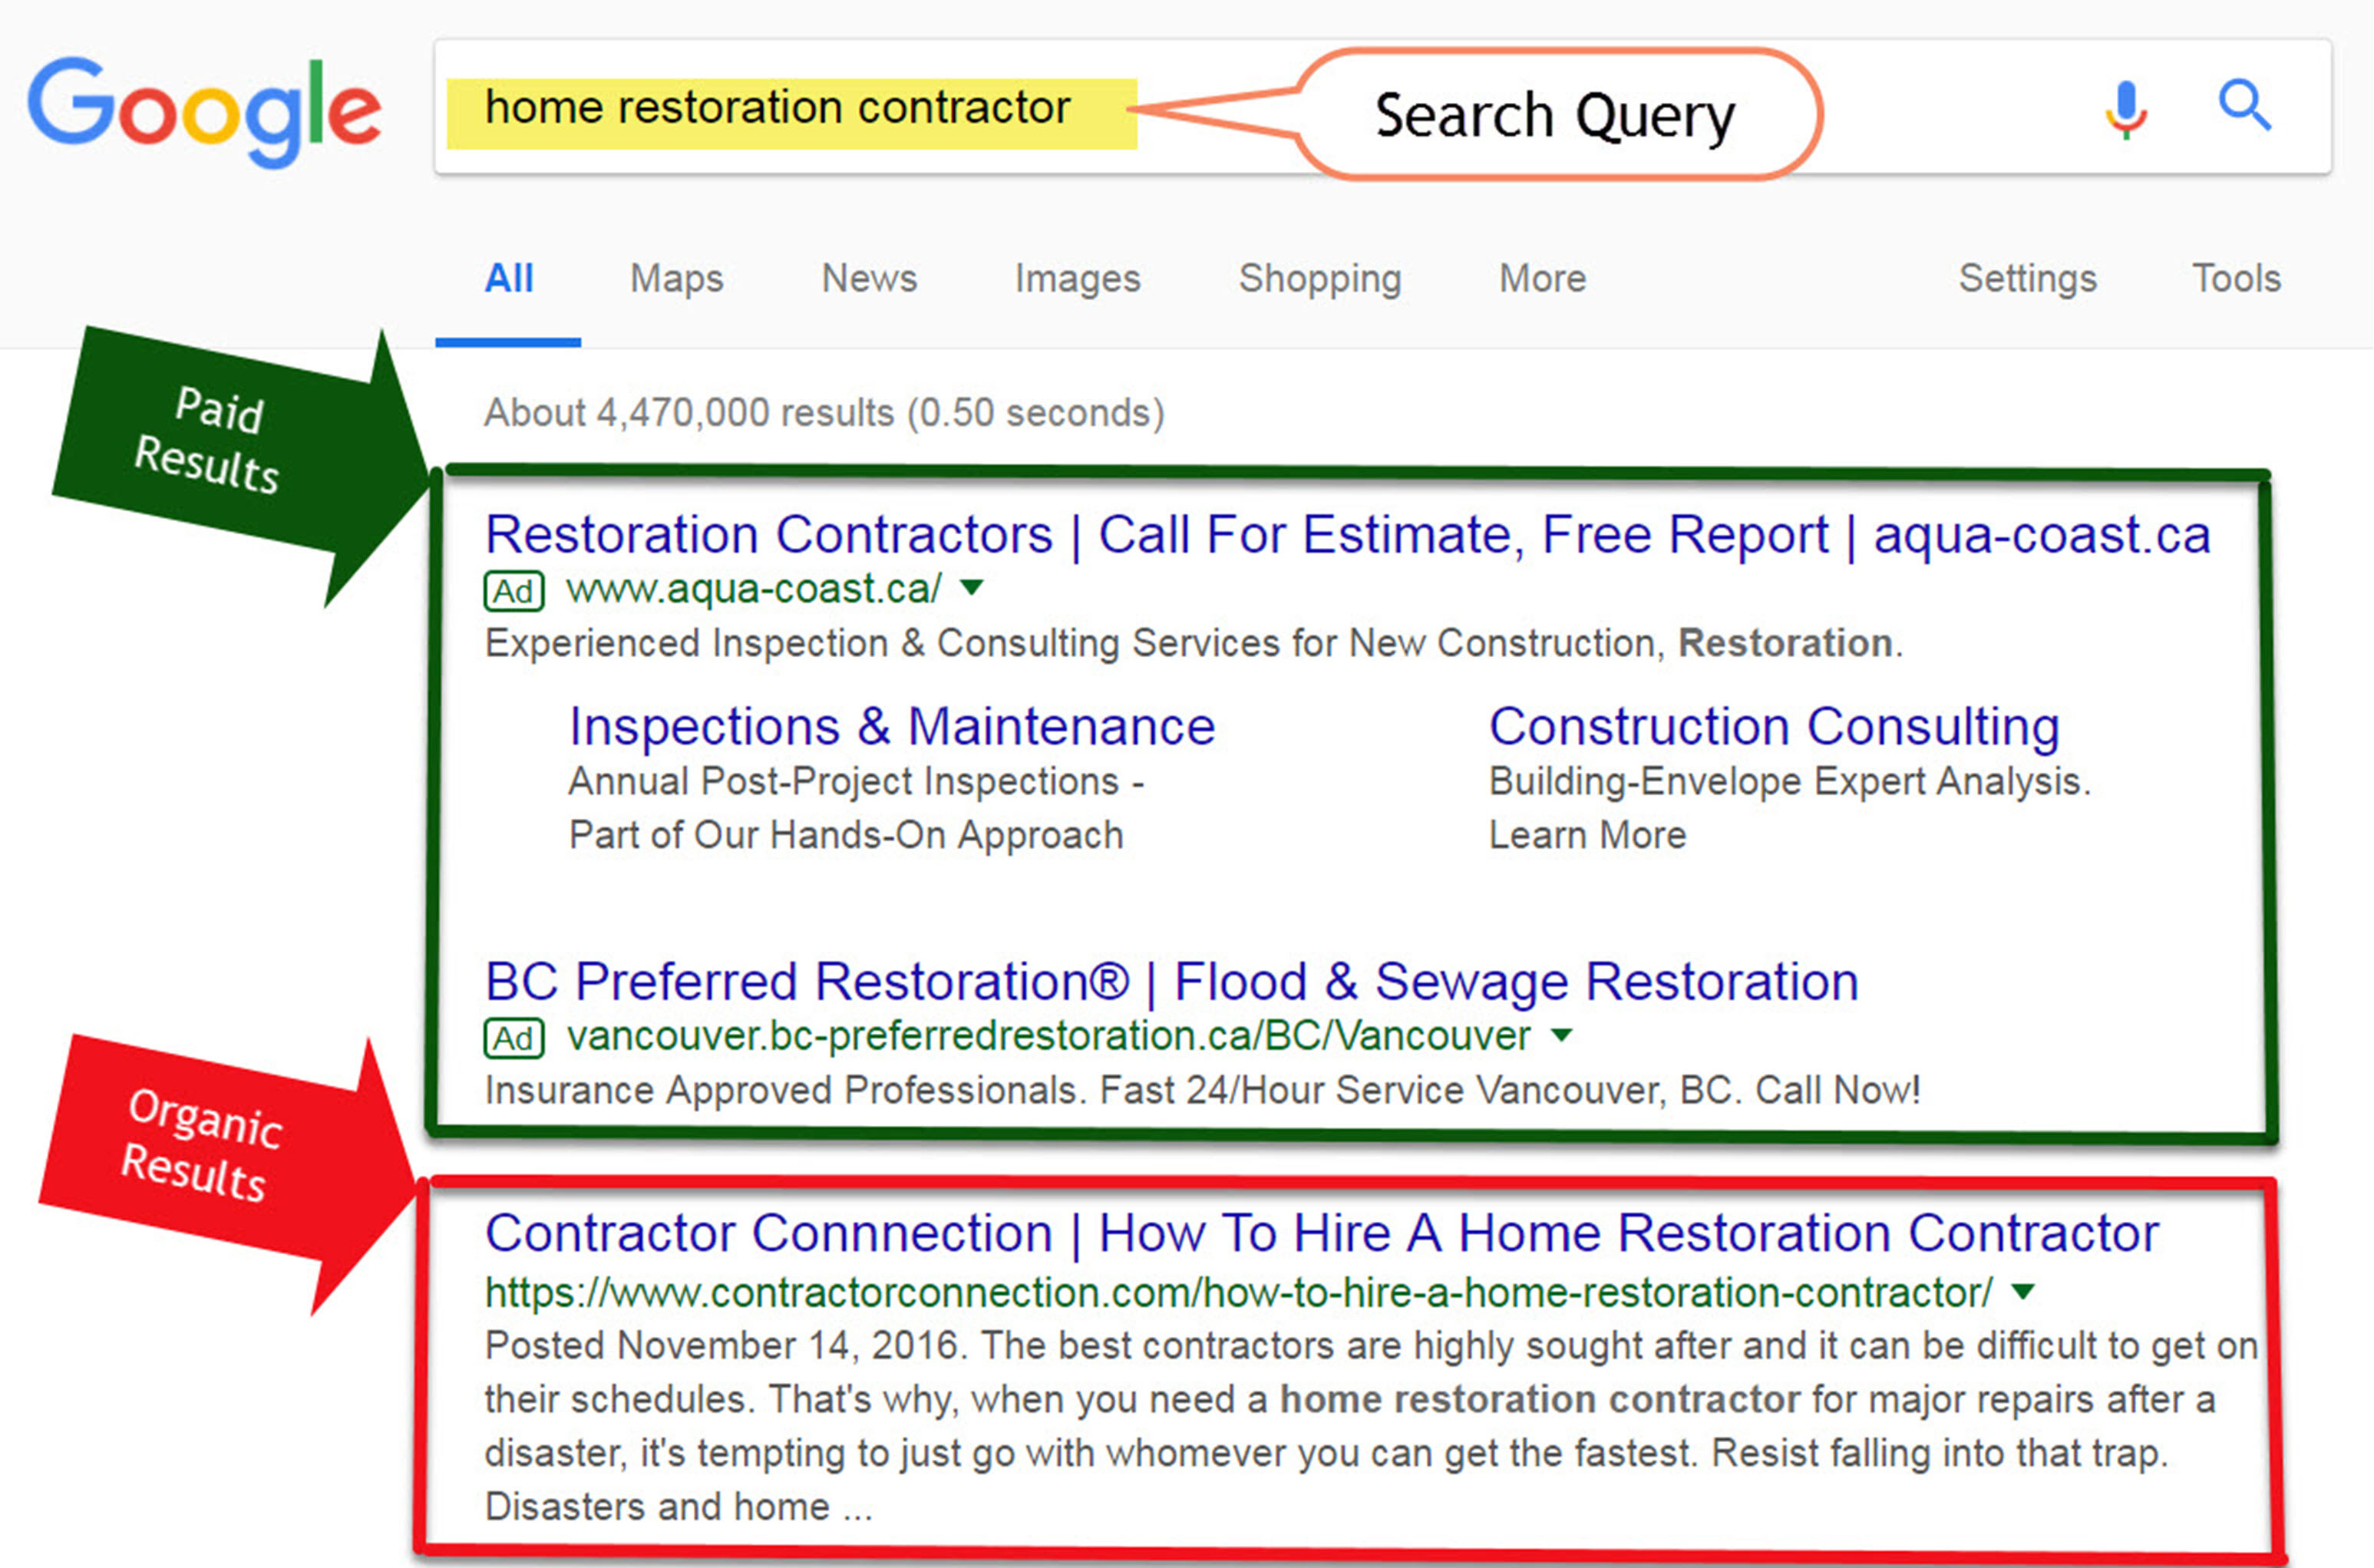 Organic Search Results VS Google Paid Results